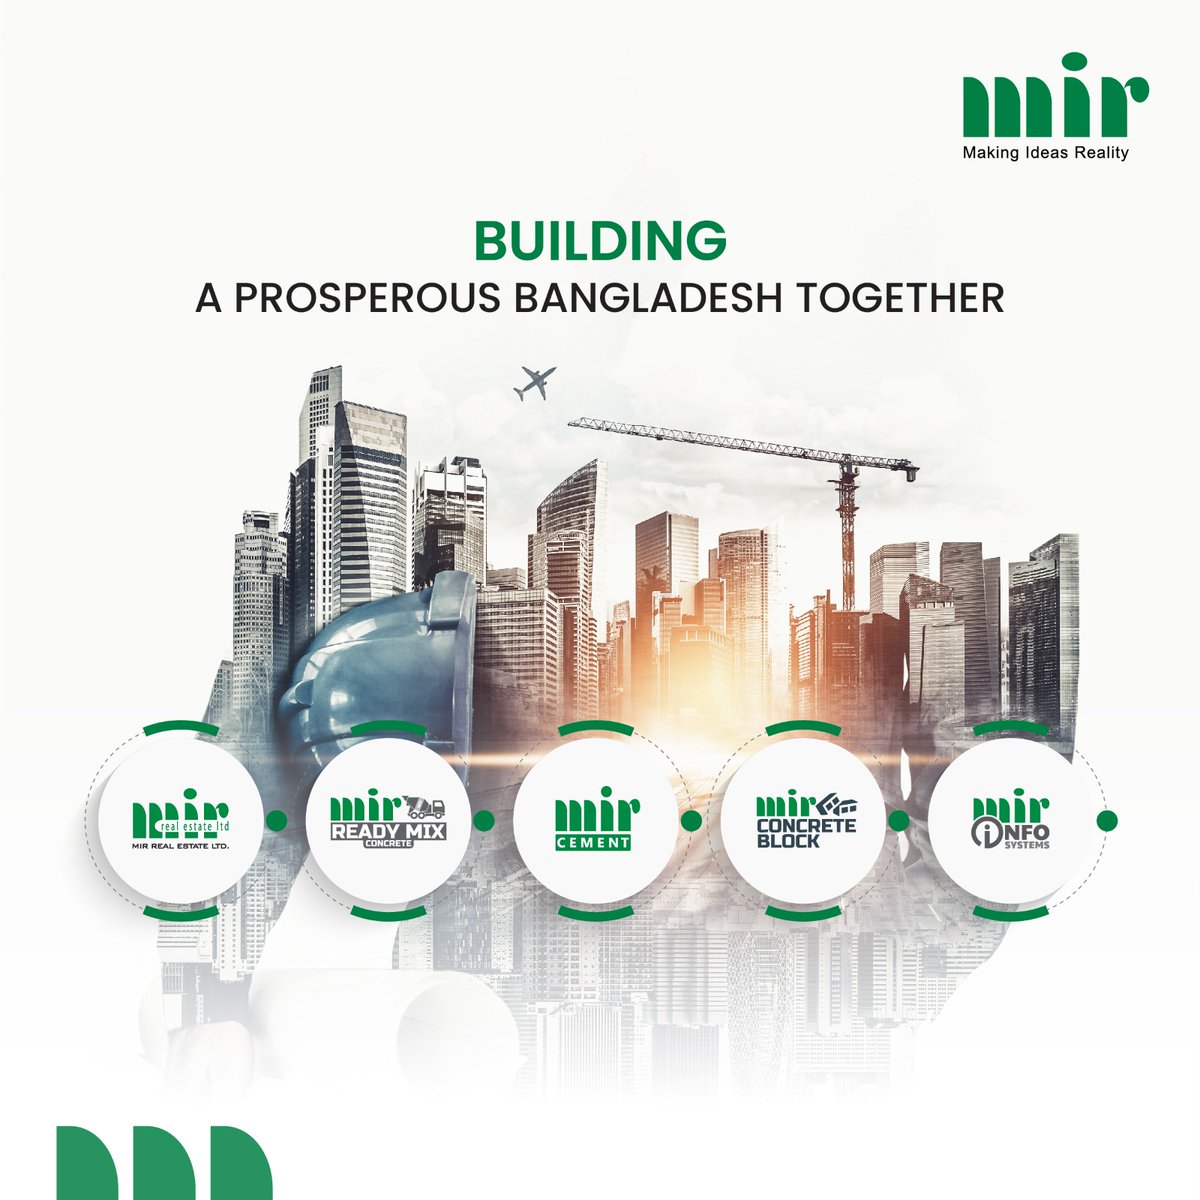 Mir Group, with its operations in construction, cement, real estate, and concrete products, contributes to making the vision of a Prosperous Bangladesh a reality.

mirgroupbd.com

#mir #mirgroup #MakingIdeasReality
#BuildingForTheFuture #DreamsToReality
#BrighterFuture